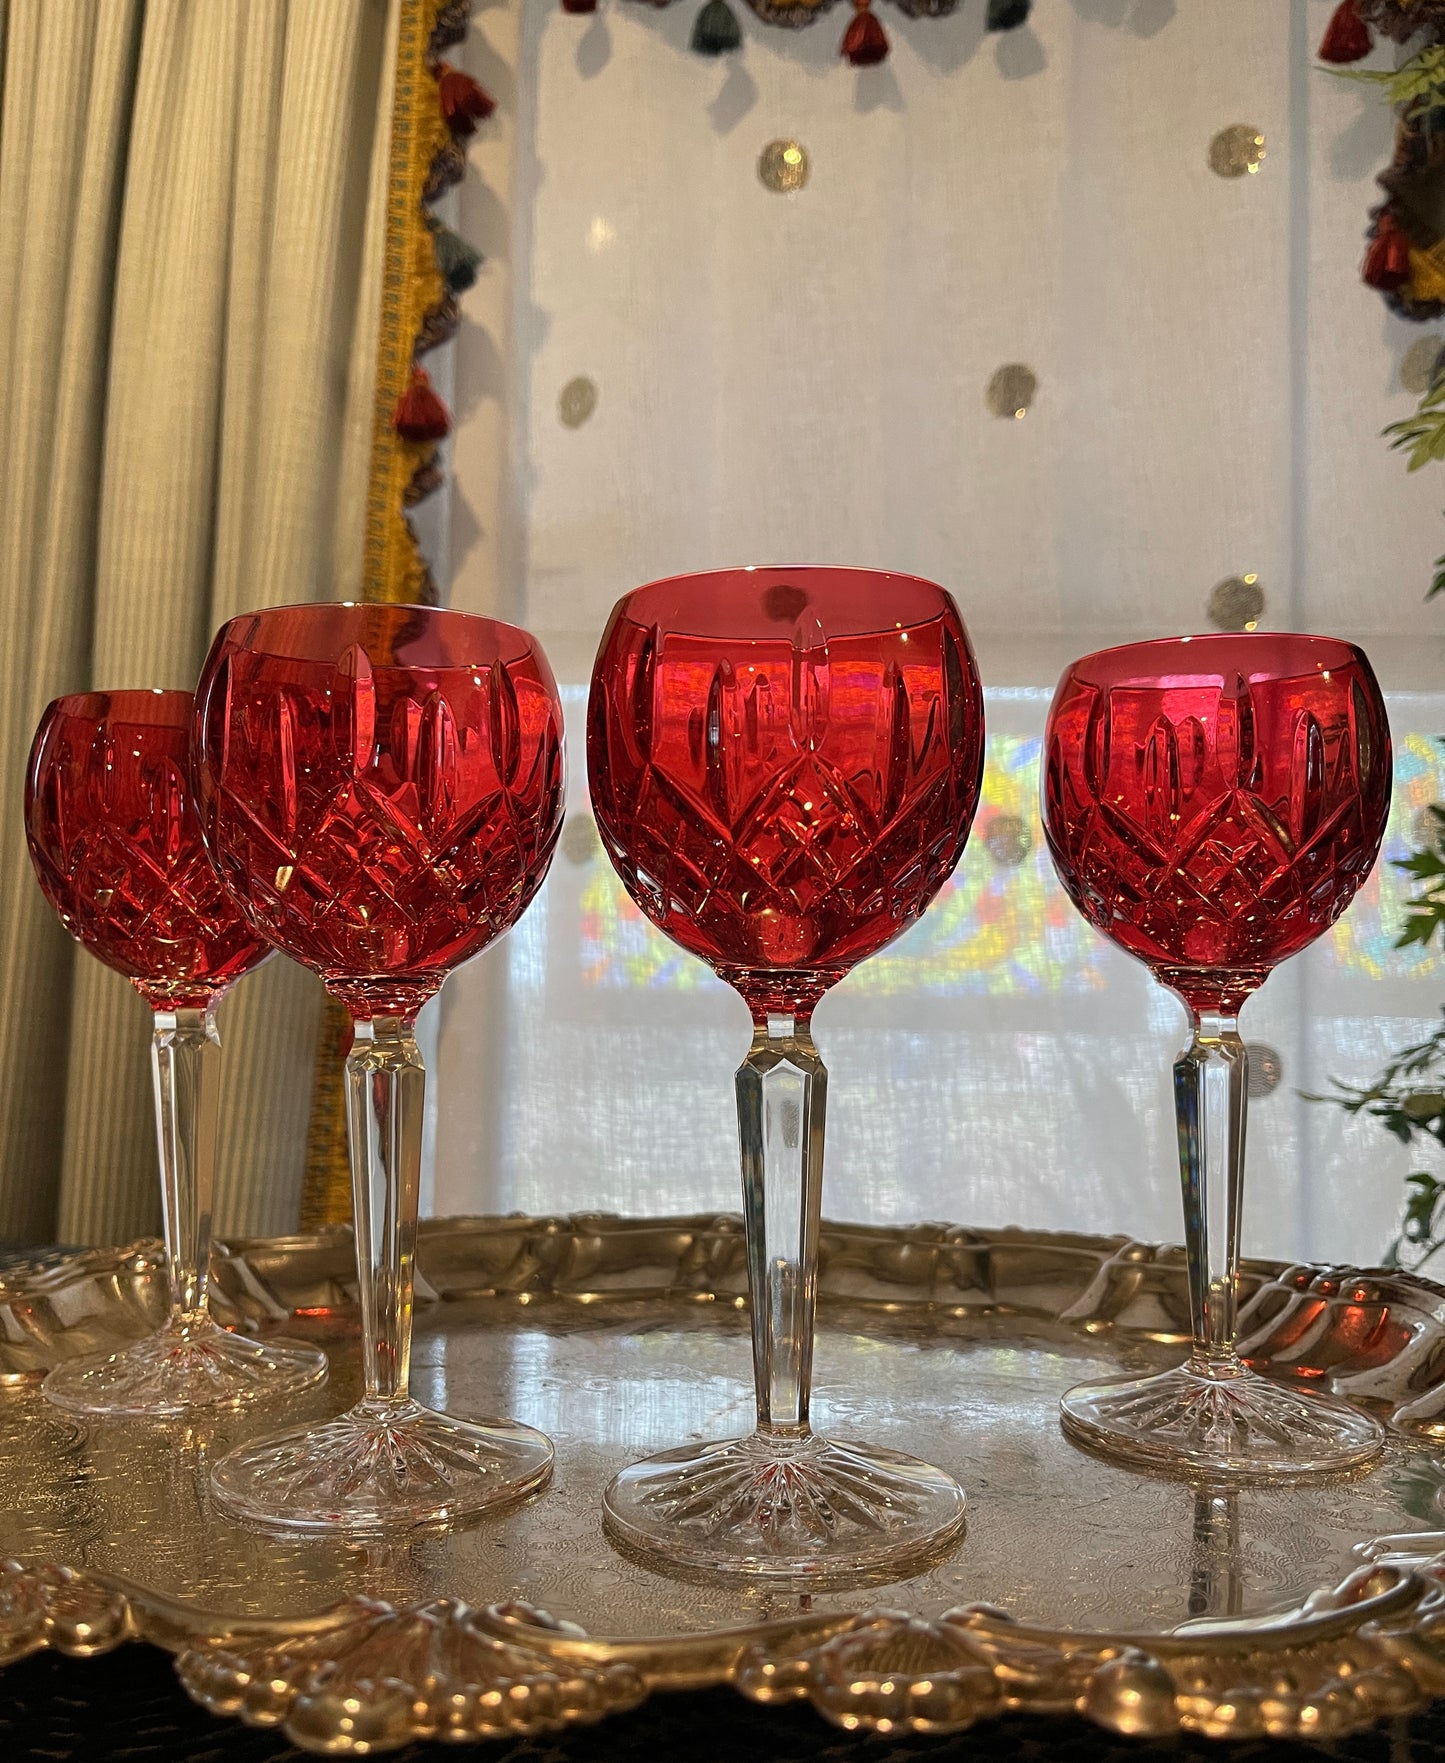 Waterford Lismore Crimson Red Hock Wine Glasses, Sold in Pairs, Pristine